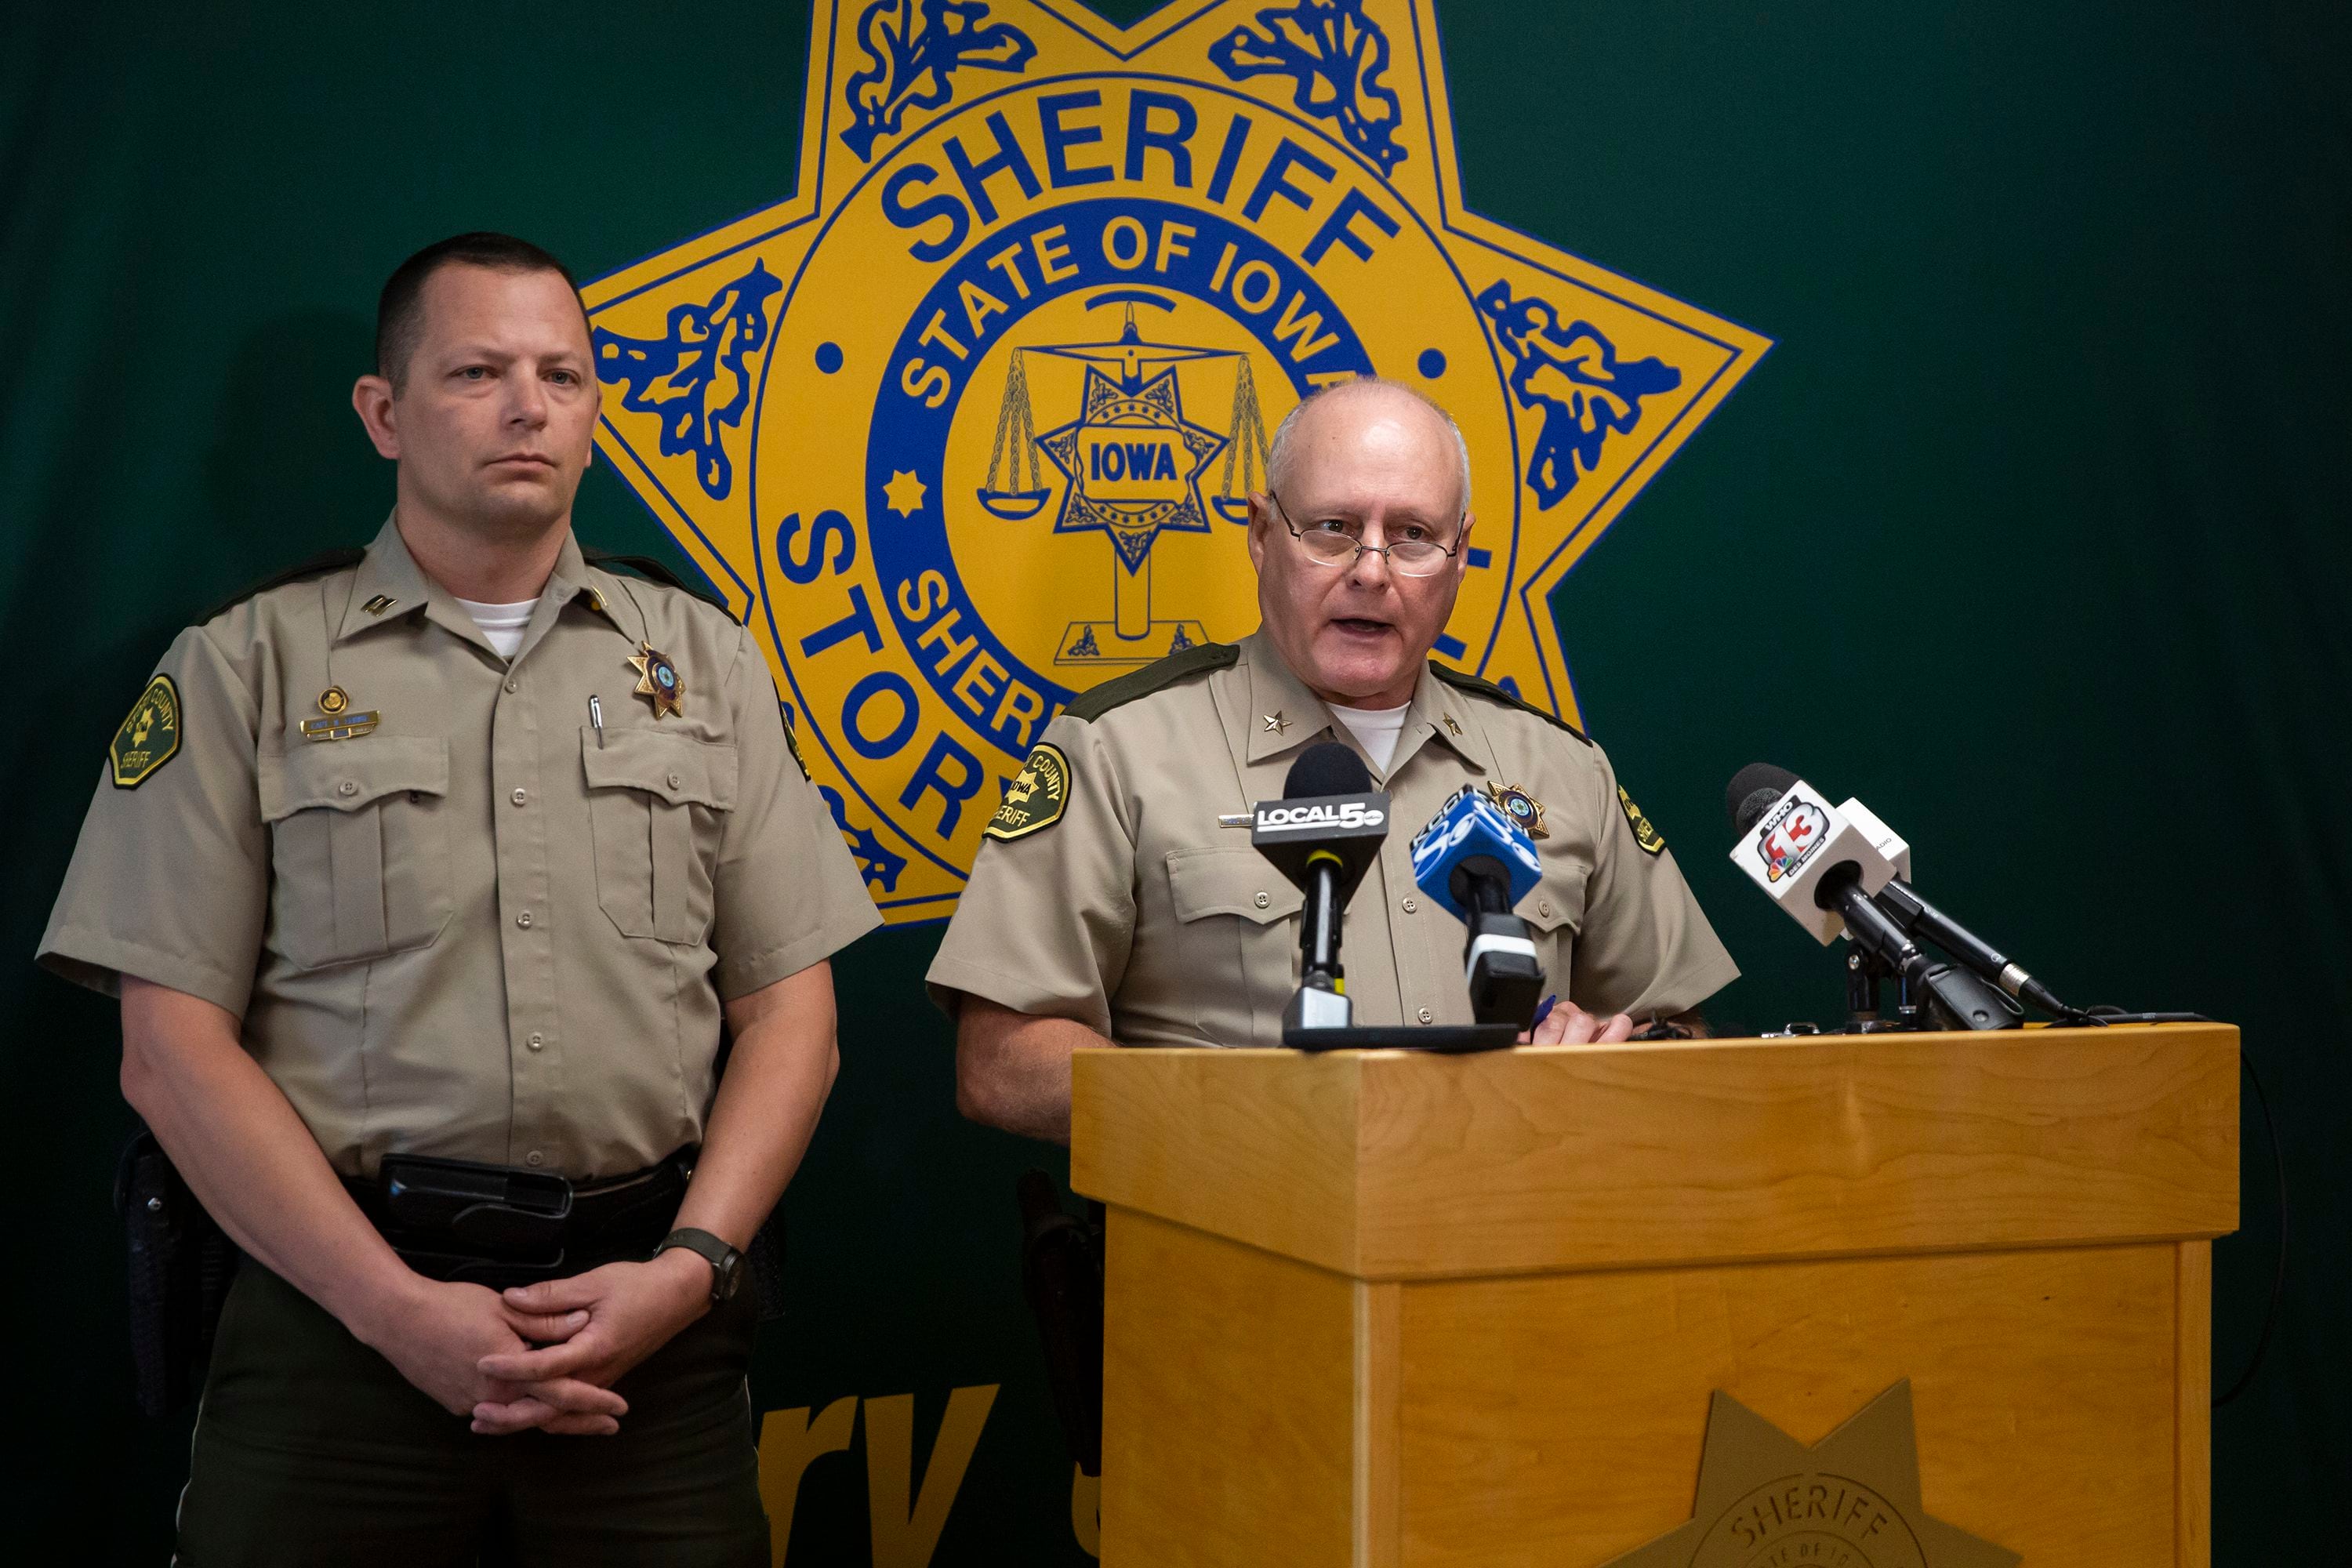 Story Country Sheriff Paul Fitzgerald, right, and Story County Chief Deputy Nicholas Lennie provide more information about the shooting at Ames' Cornerstone Church, during a news conference on Friday, June 3, 2022, at the Story County Sheriff's Office in Nevada, Iowa. (Kelsey Kremer/The Des Moines Register via AP)